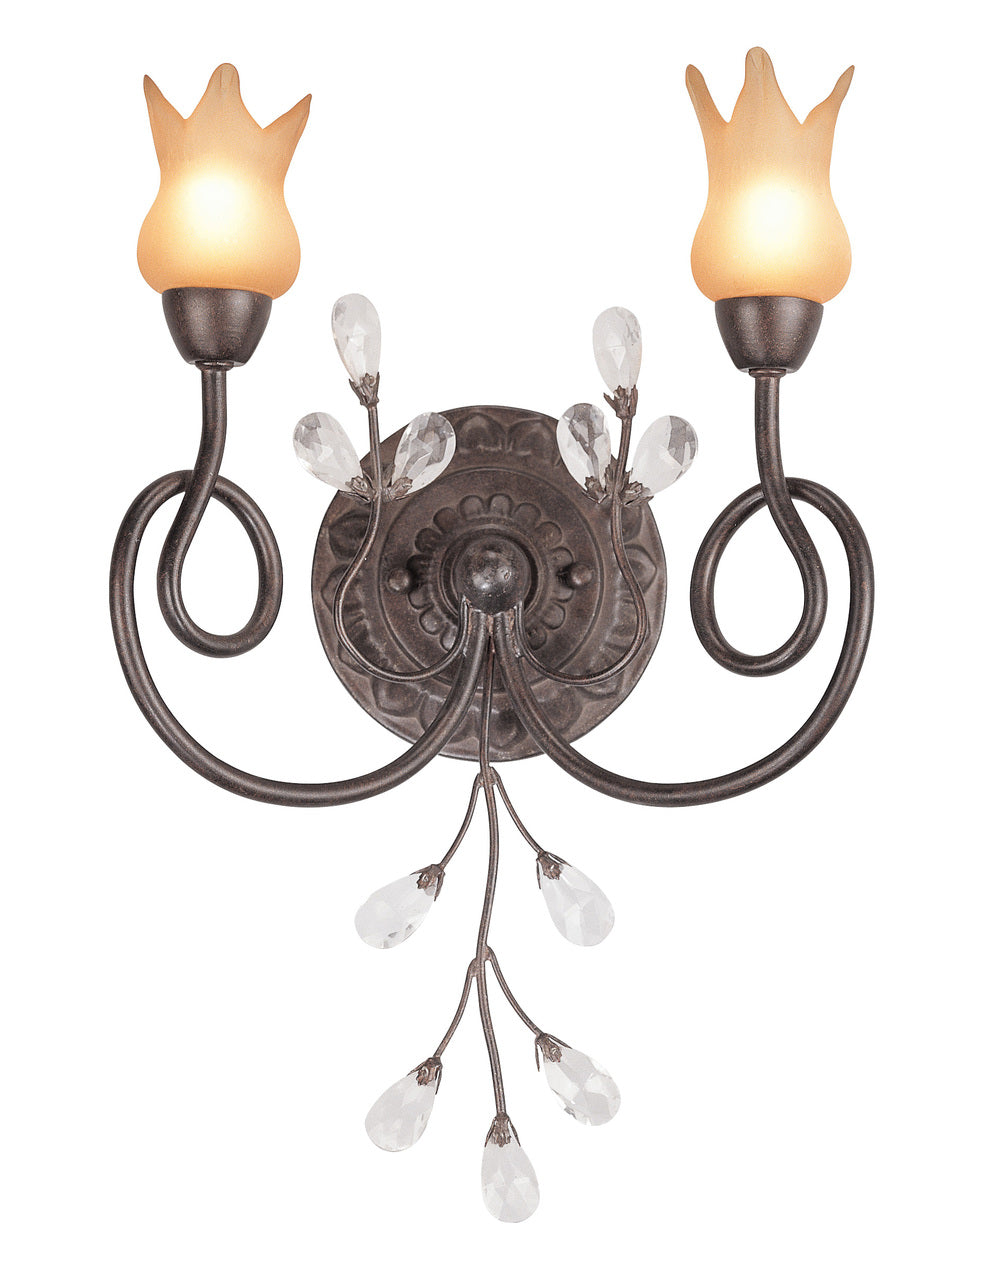 Classic Lighting 3762 BZP SGT Mandarin Wrought Iron Crystal Wall Sconce in Bronze Patina